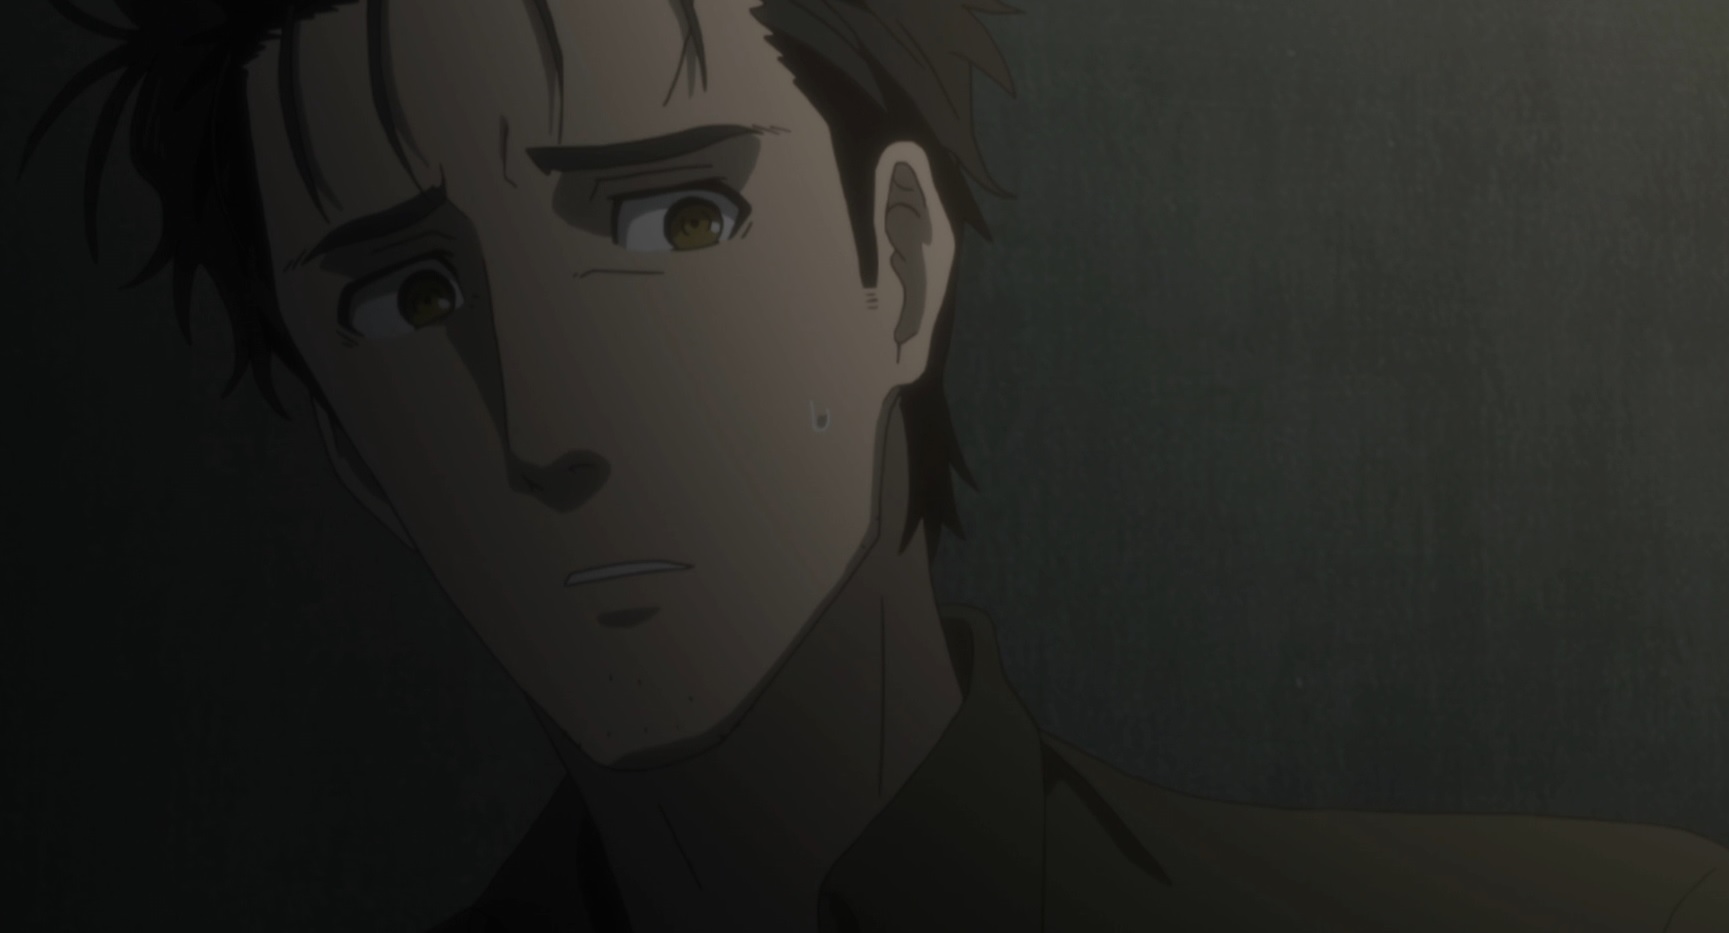 Steins Gate 0 episode 18 review